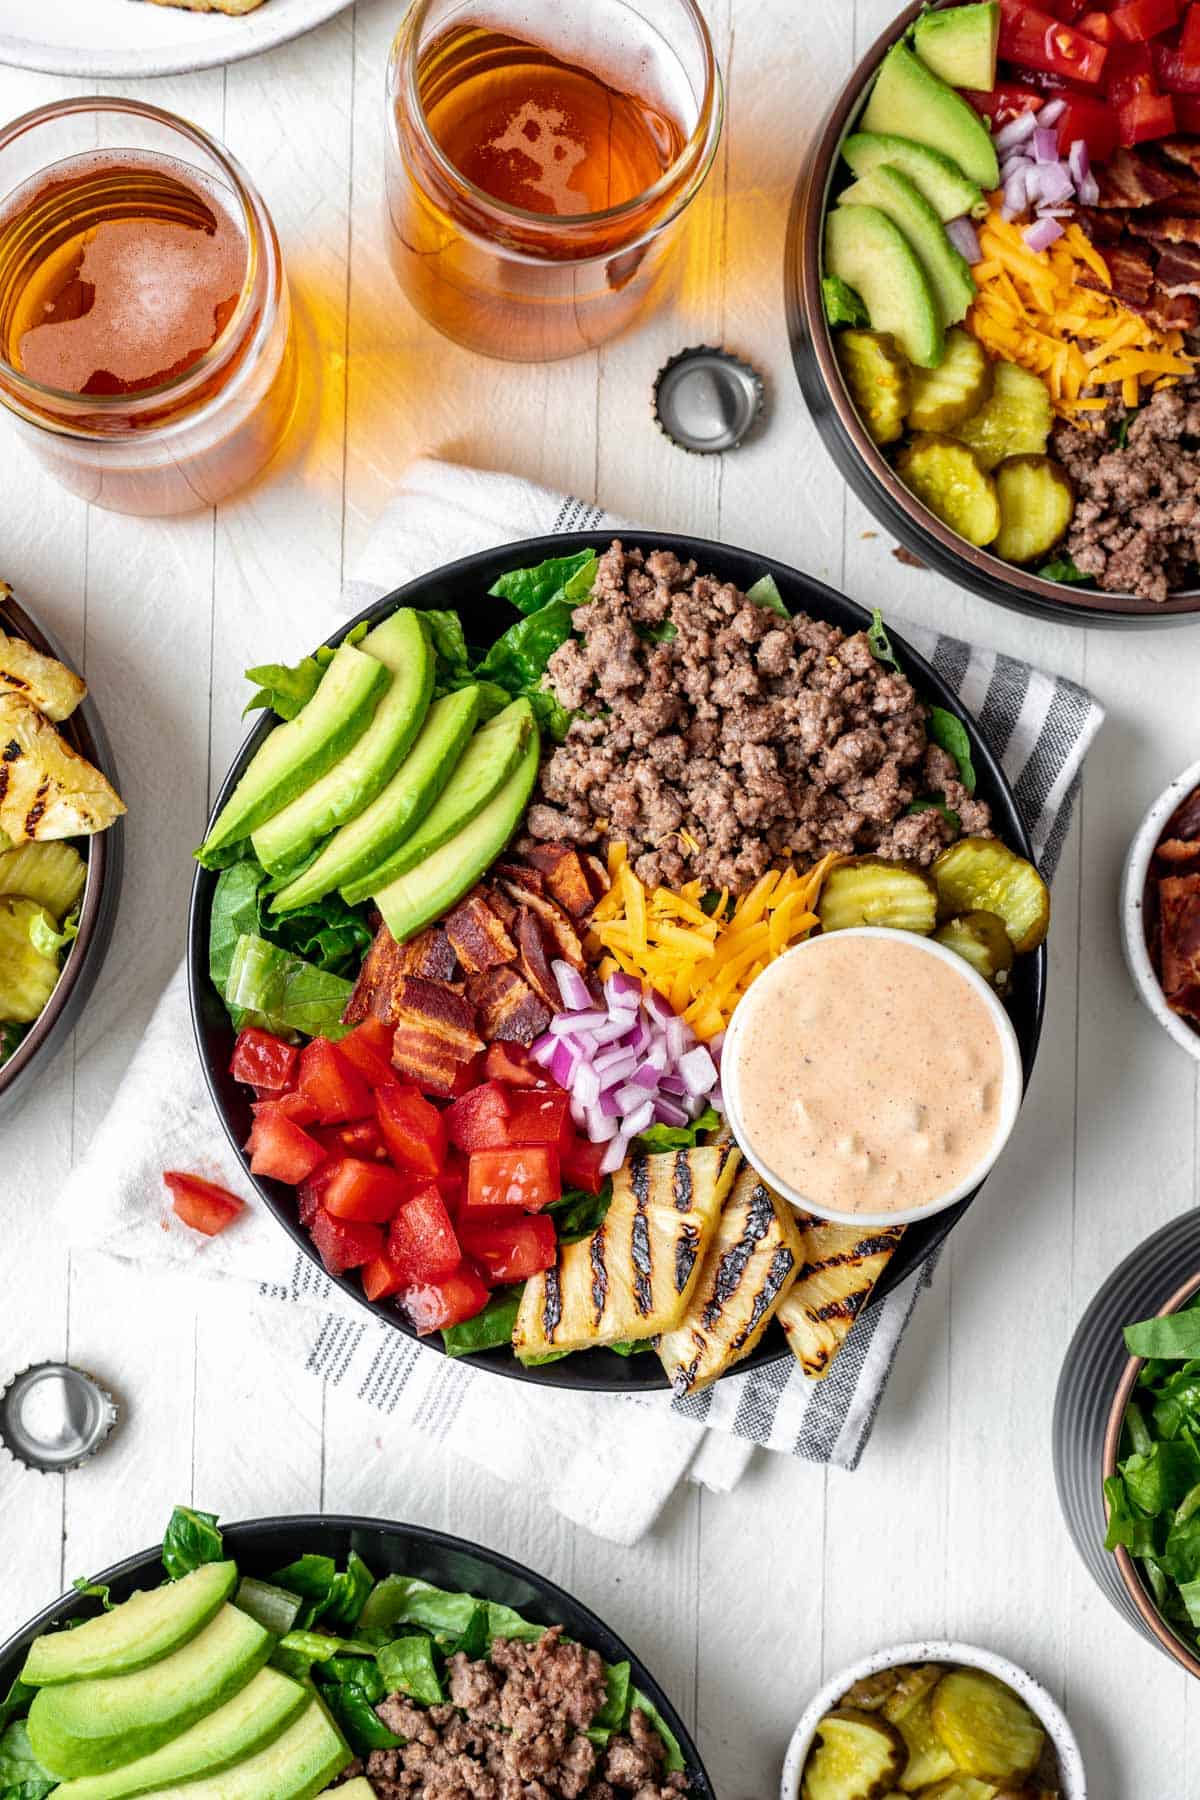 Burger bowls loaded with toppings and a side of homemade burger sauce.